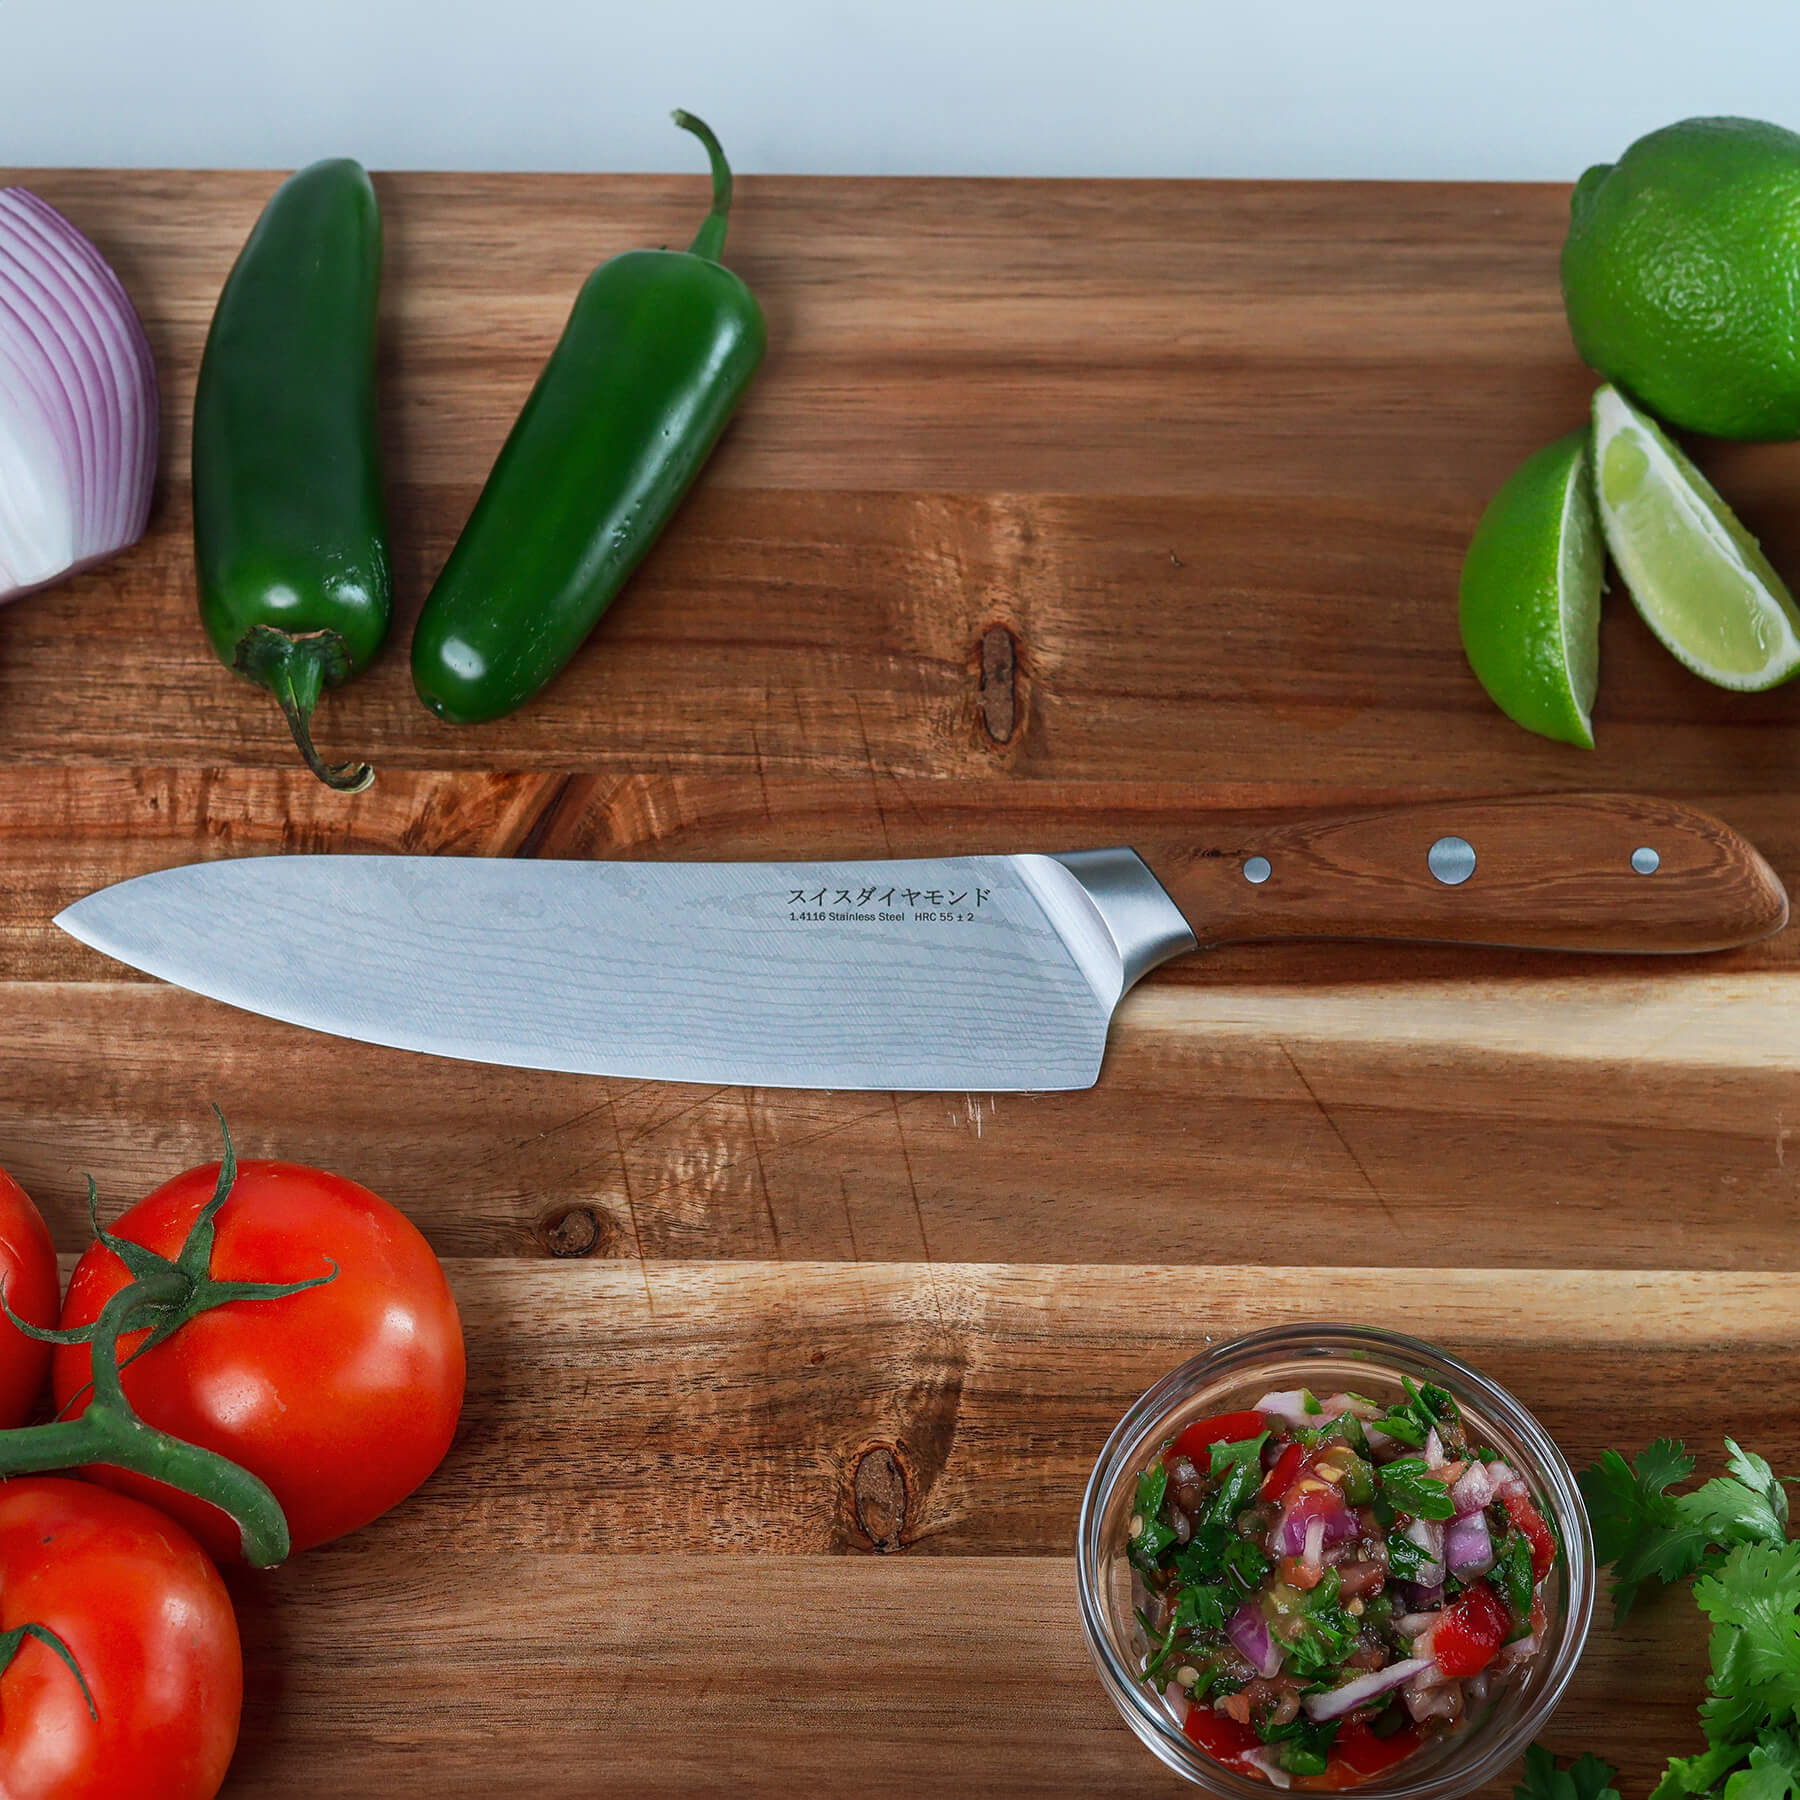 8" Damascus Chef Knife on cutting board with veggies and salsa on side